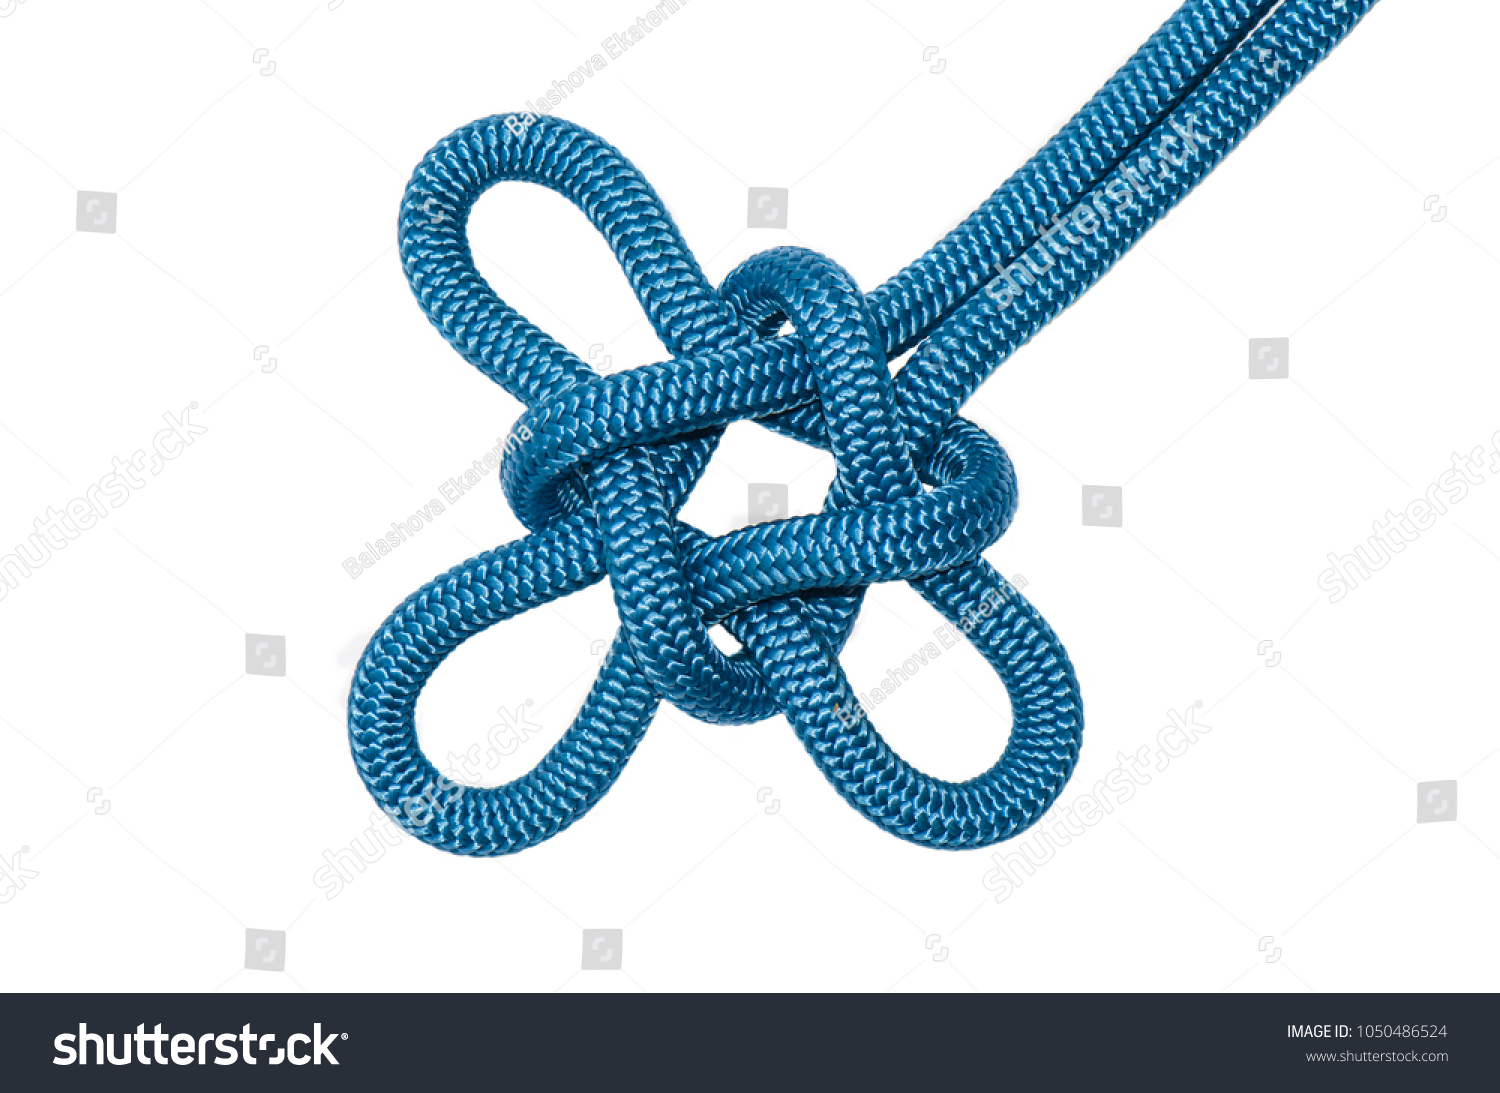 Bowline Knot Green Rope Isolated On Stock Photo 1125162581 